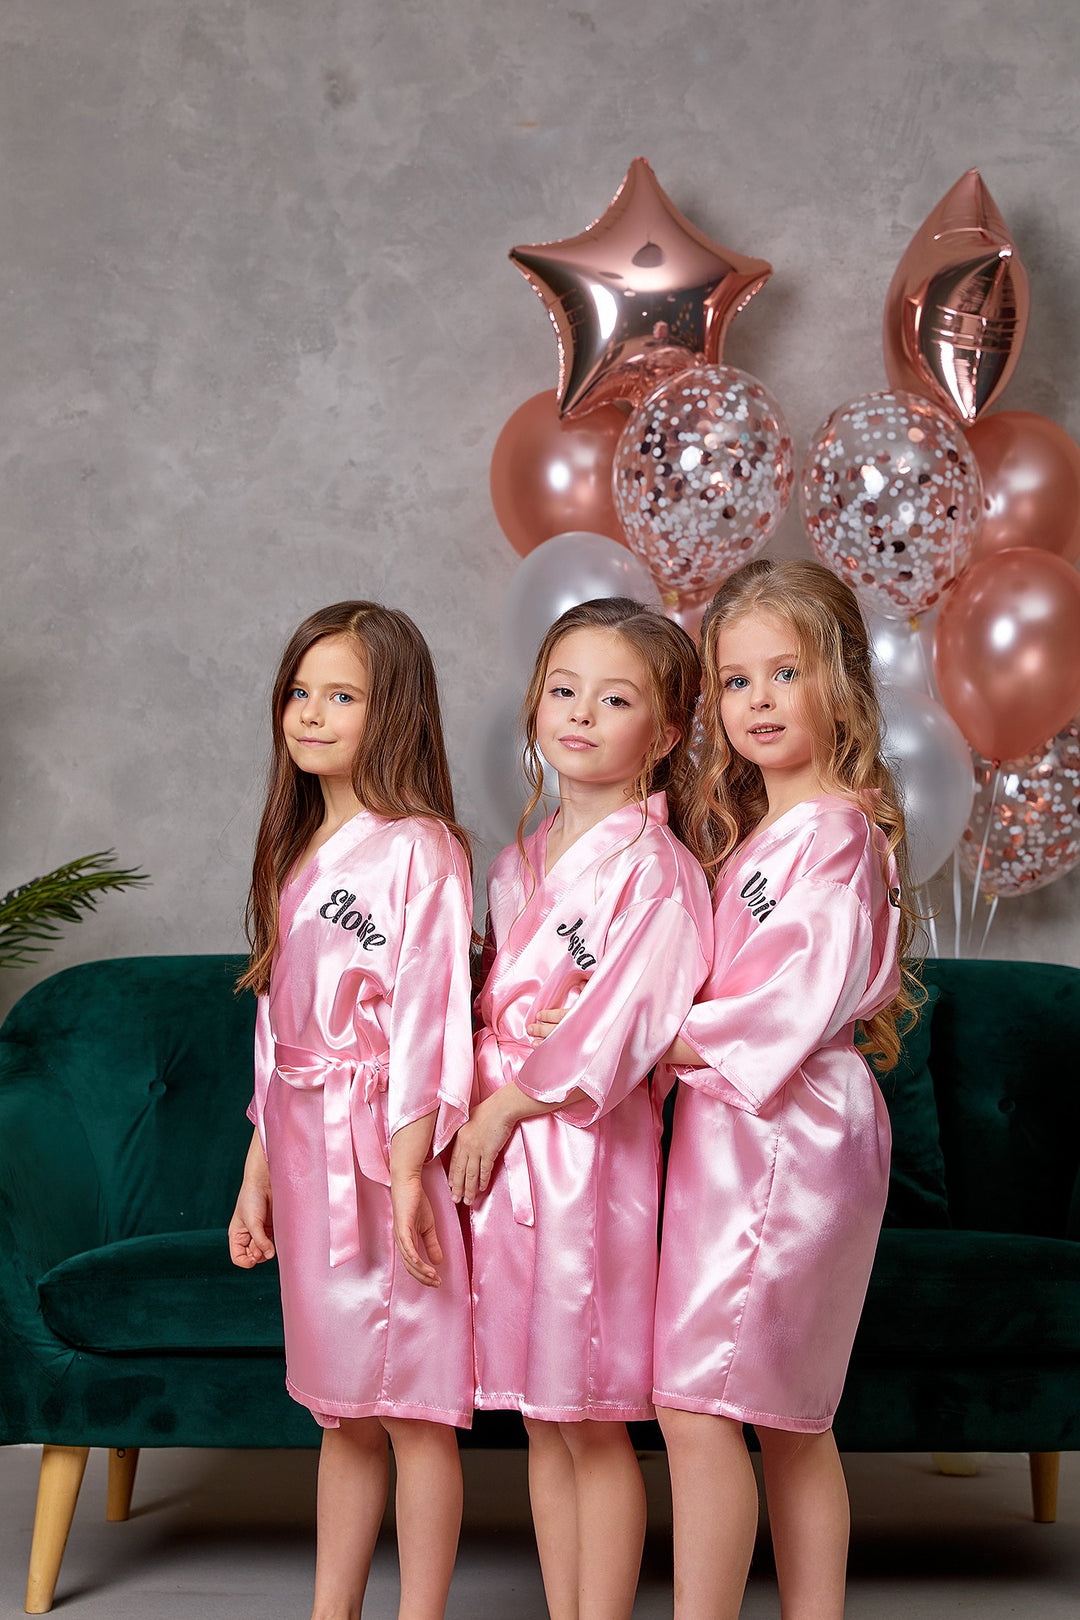 Birthday Robes, Robes For Girls, Kids Spa party, Birthday girl